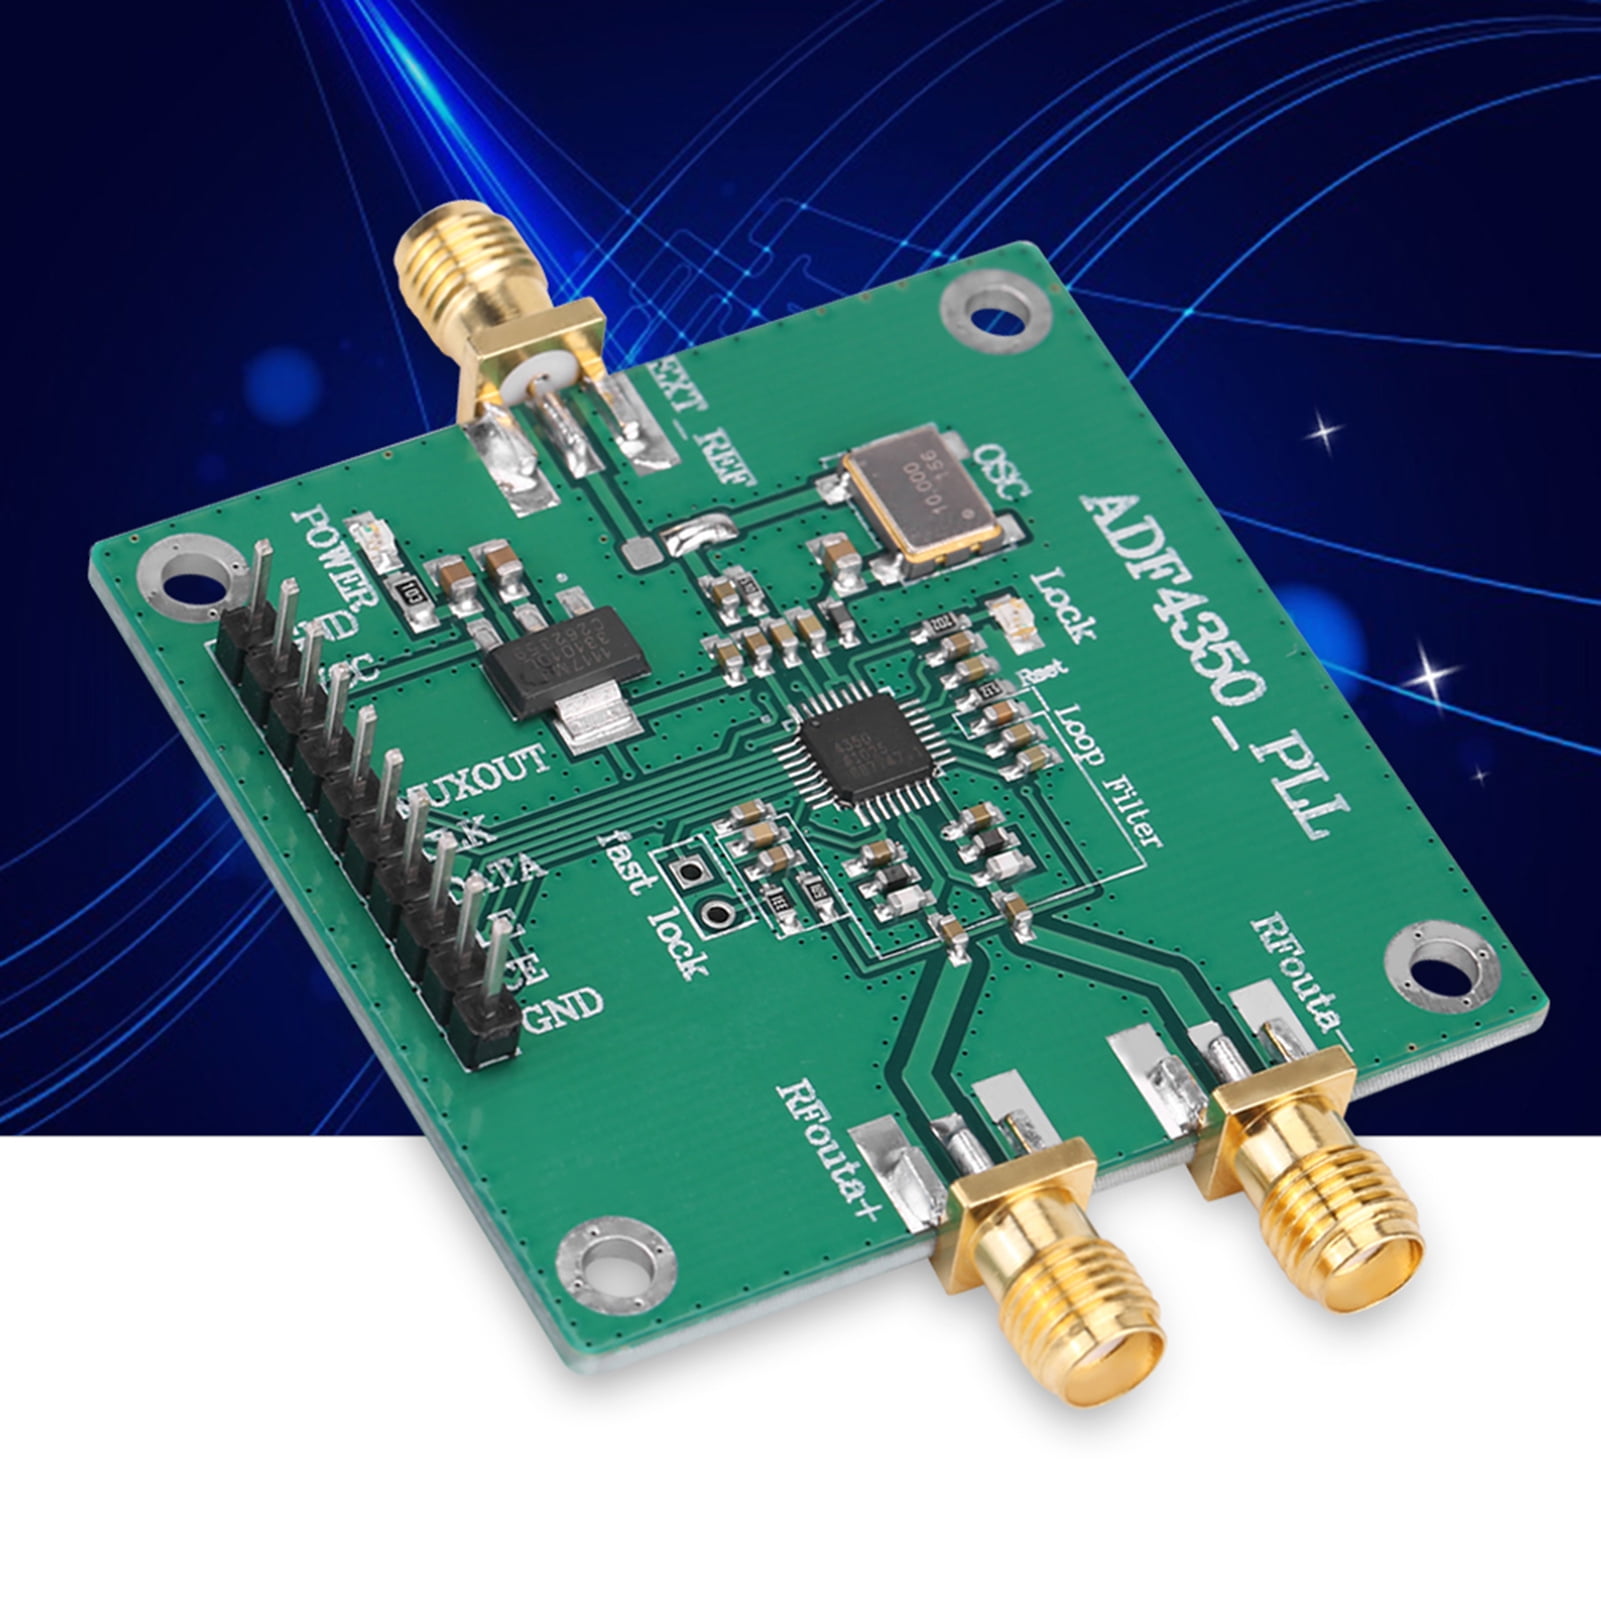 Details about   Phase Locked Loop Board 137M-4.4 GHz RF Signal Source Phase Locked Loop 